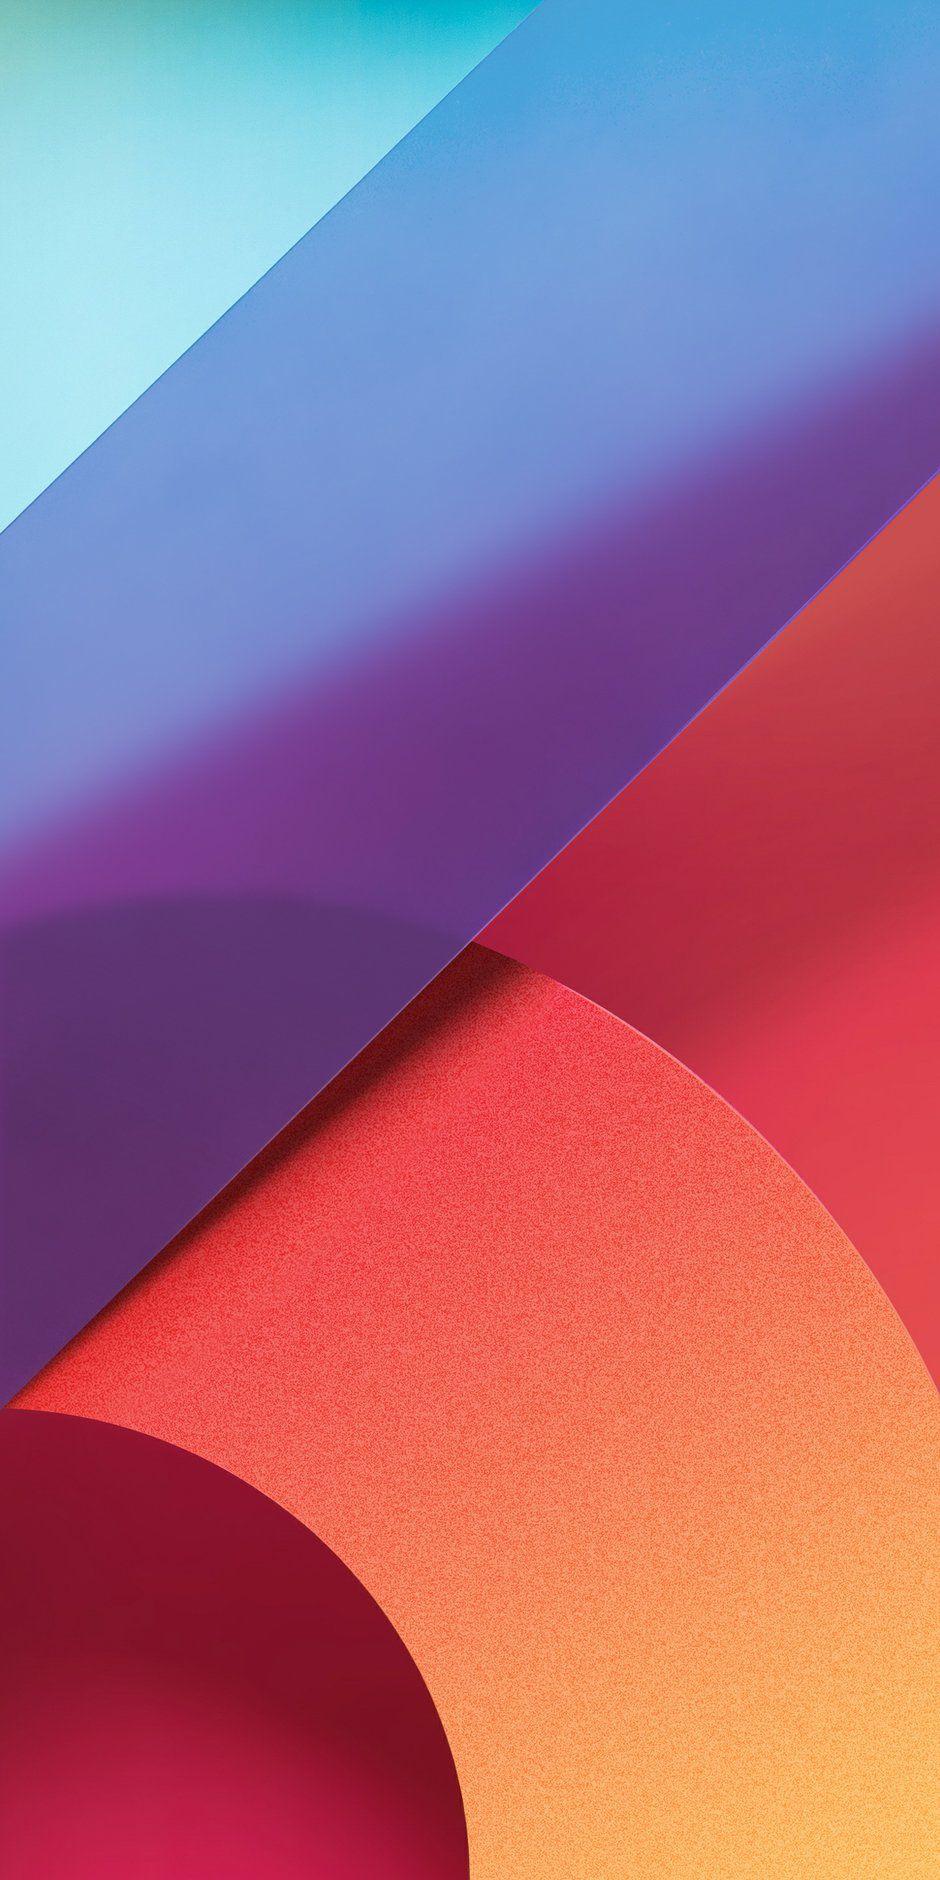 LG G6 wallpapers making video